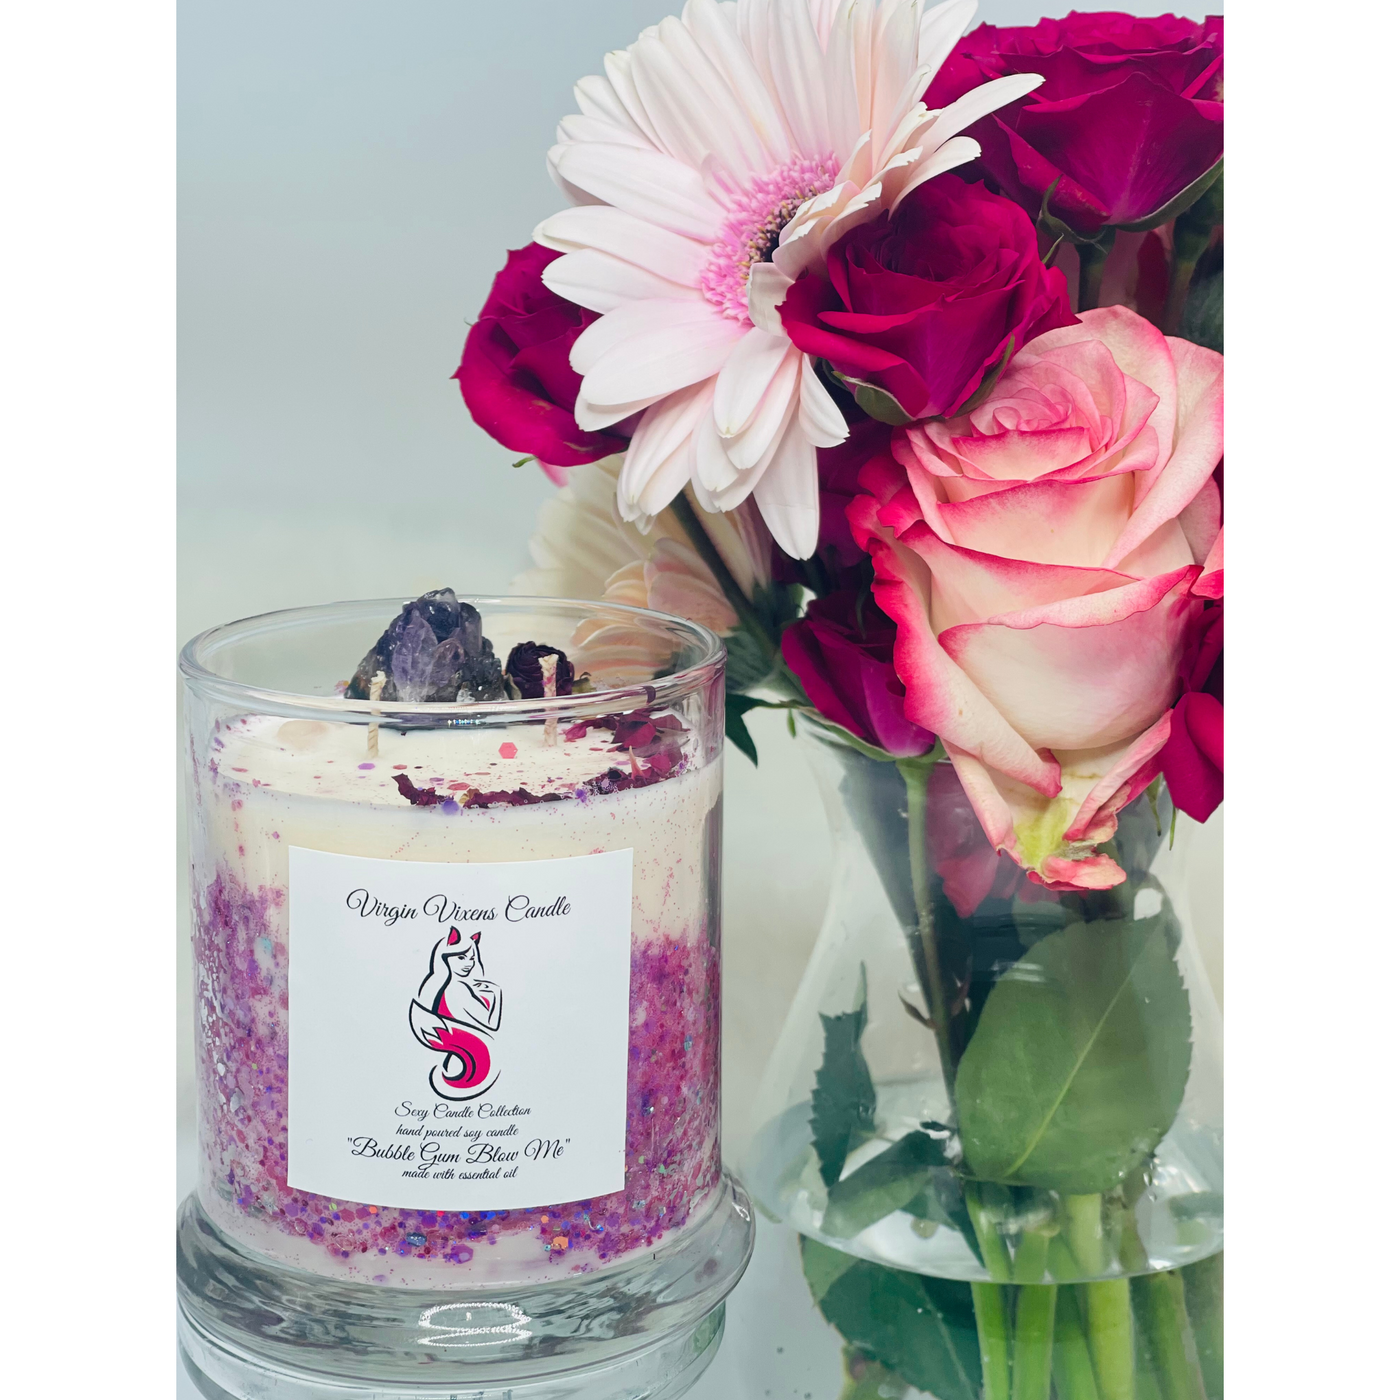 Add Sweetness to Home with "Bubble Gum Blow Me" Strawberry Scented Candle